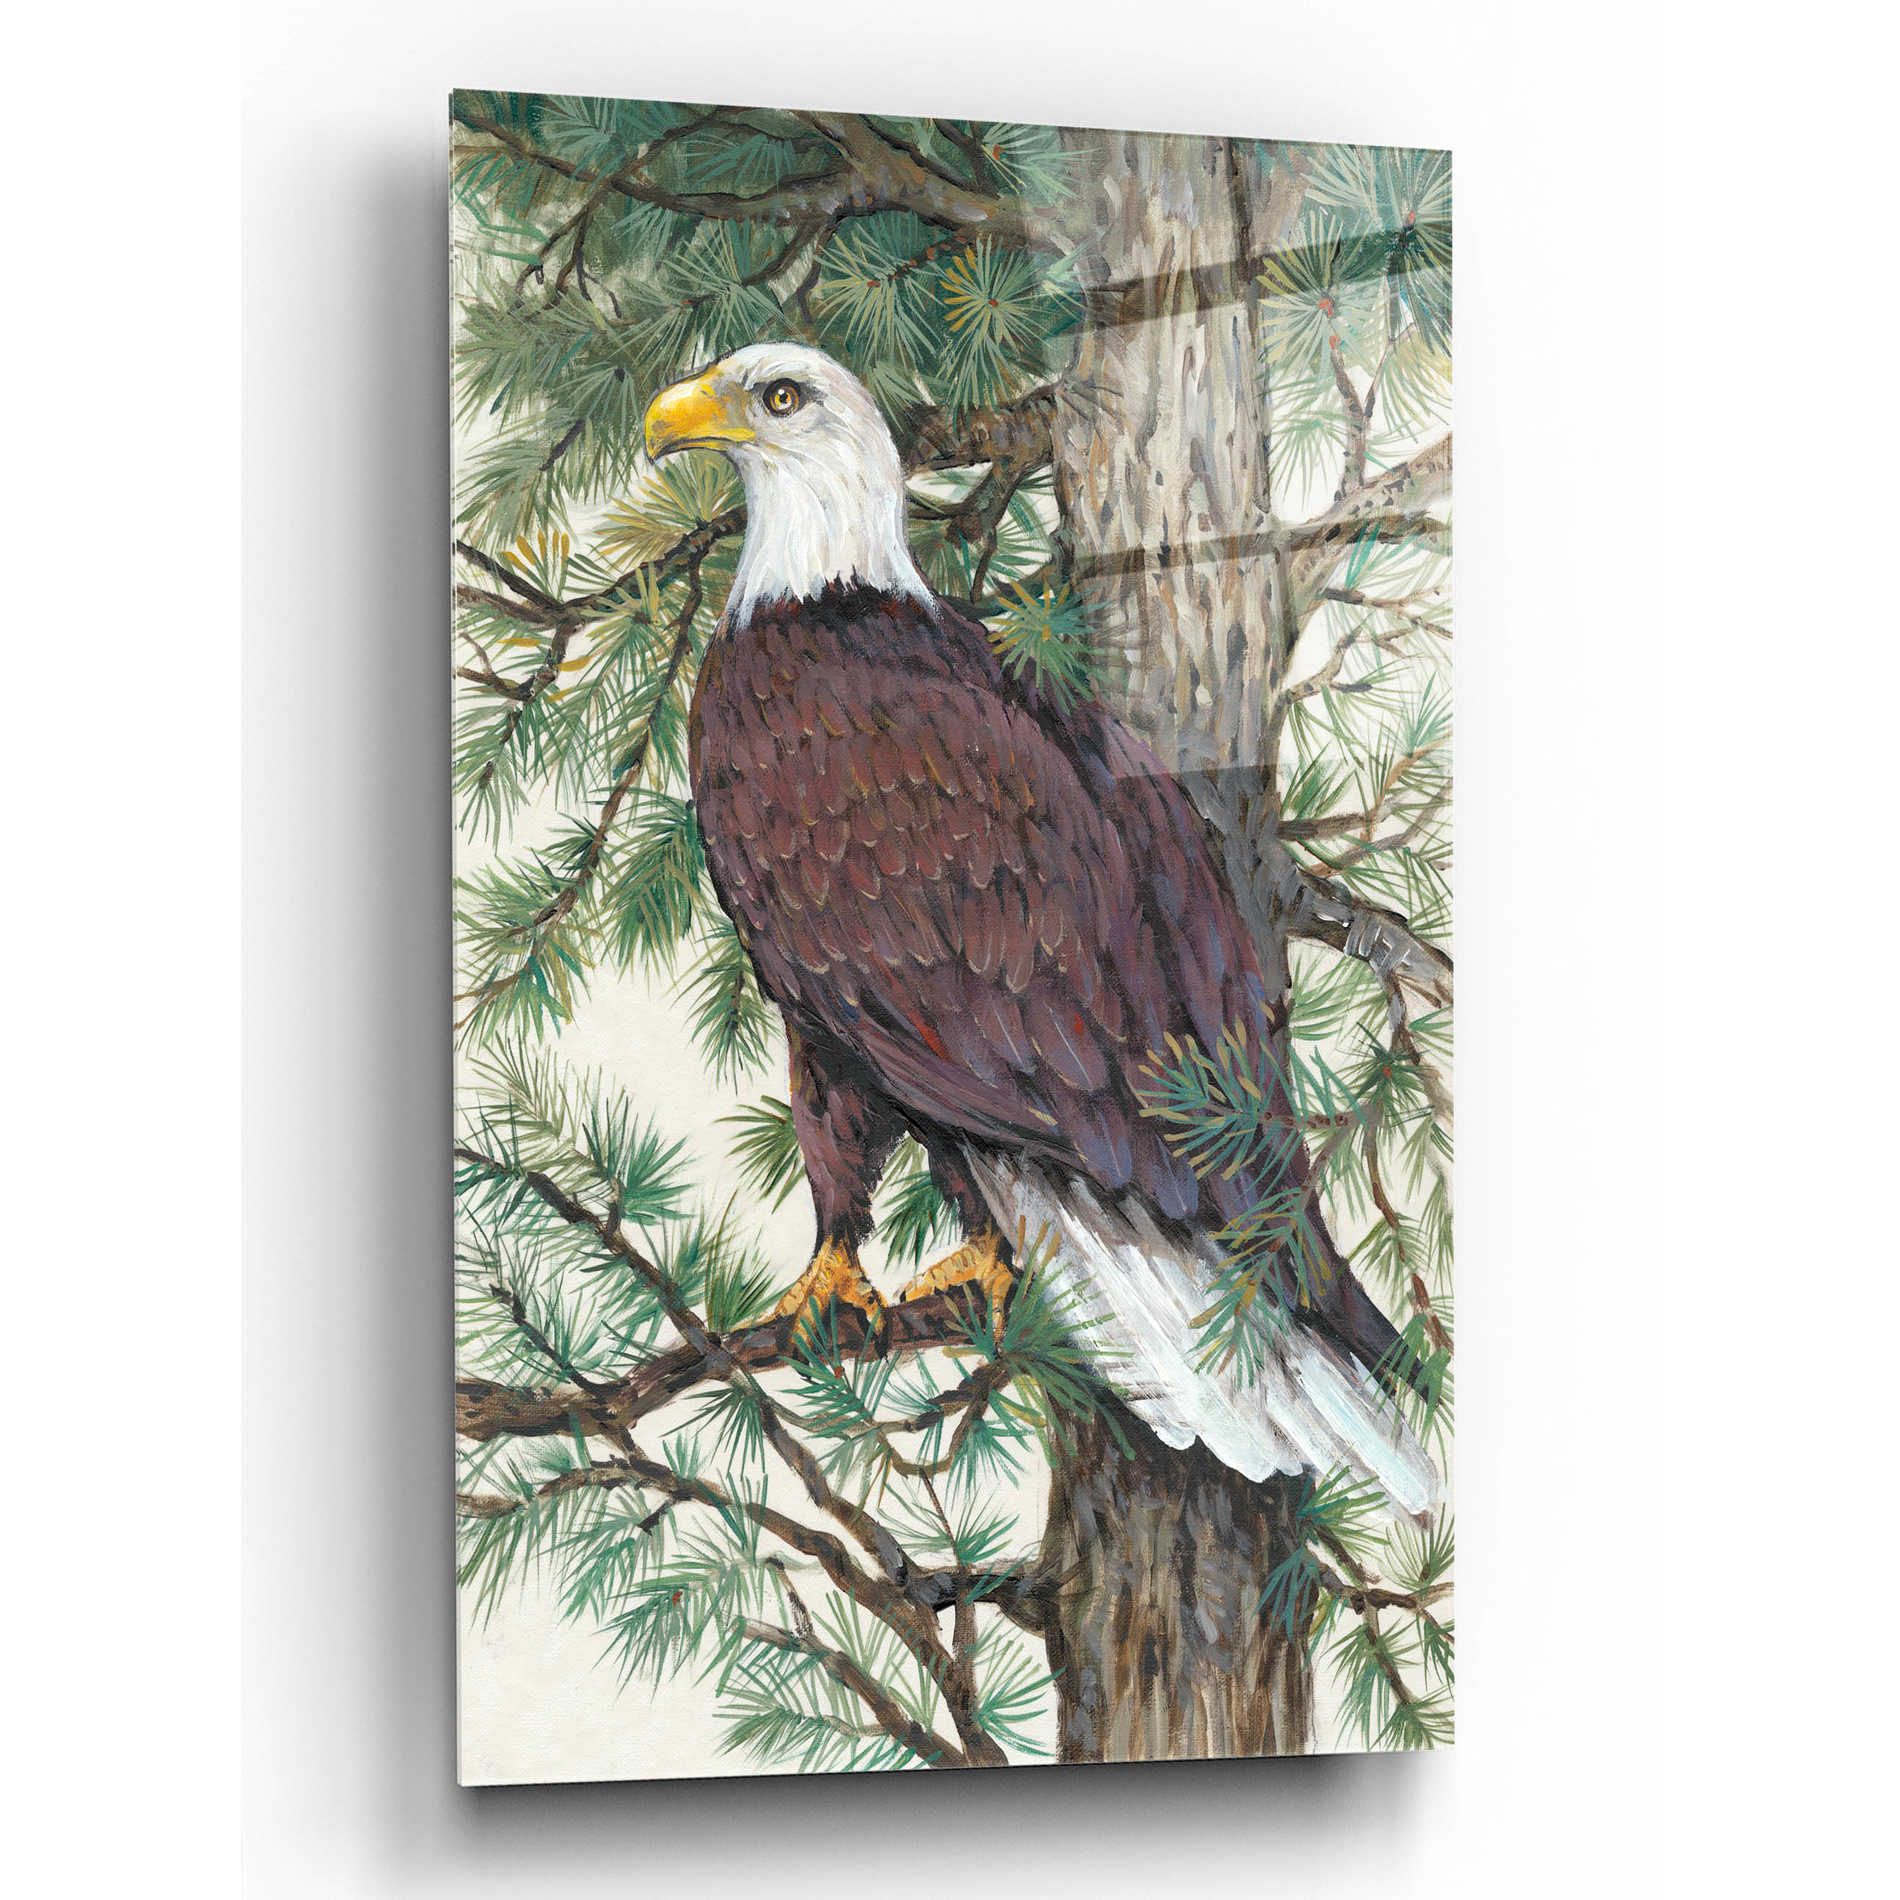 Epic Art 'Eagle in the Pine' by Tim O'Toole, Acrylic Glass Wall Art,12x16